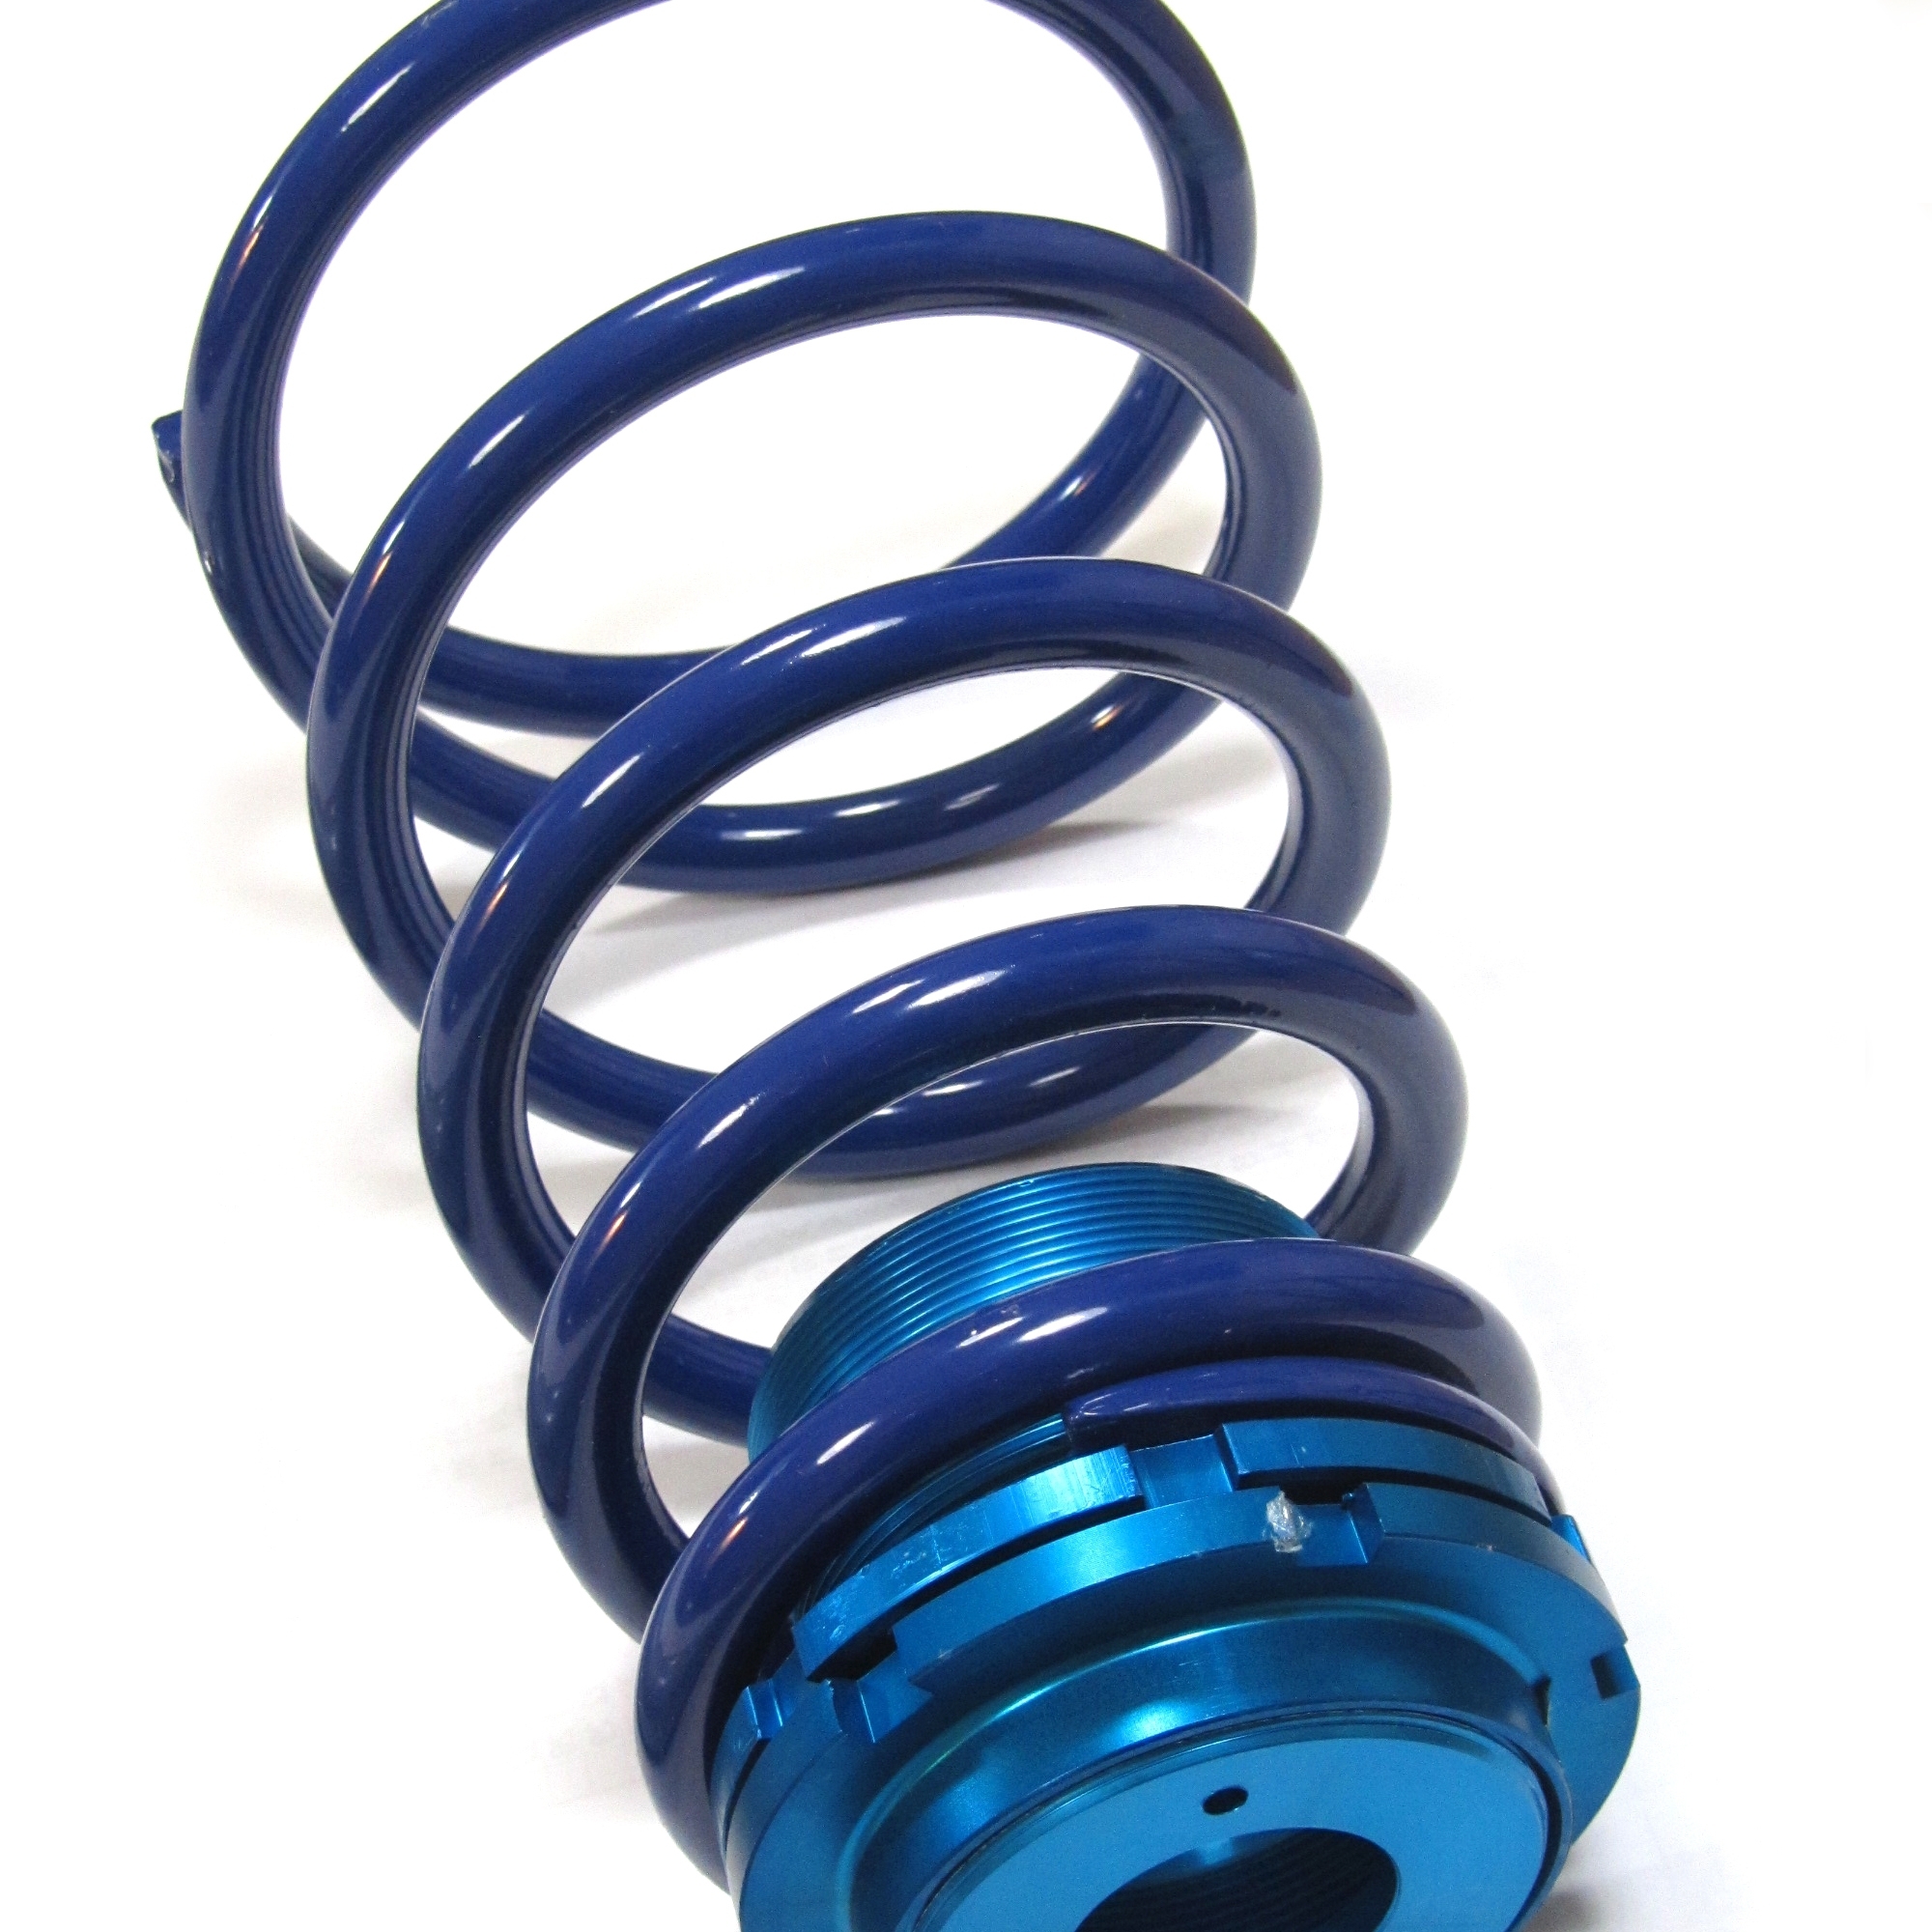 Blueline Coilover Kit suitable for BMW E34 Touring 518i, 520i